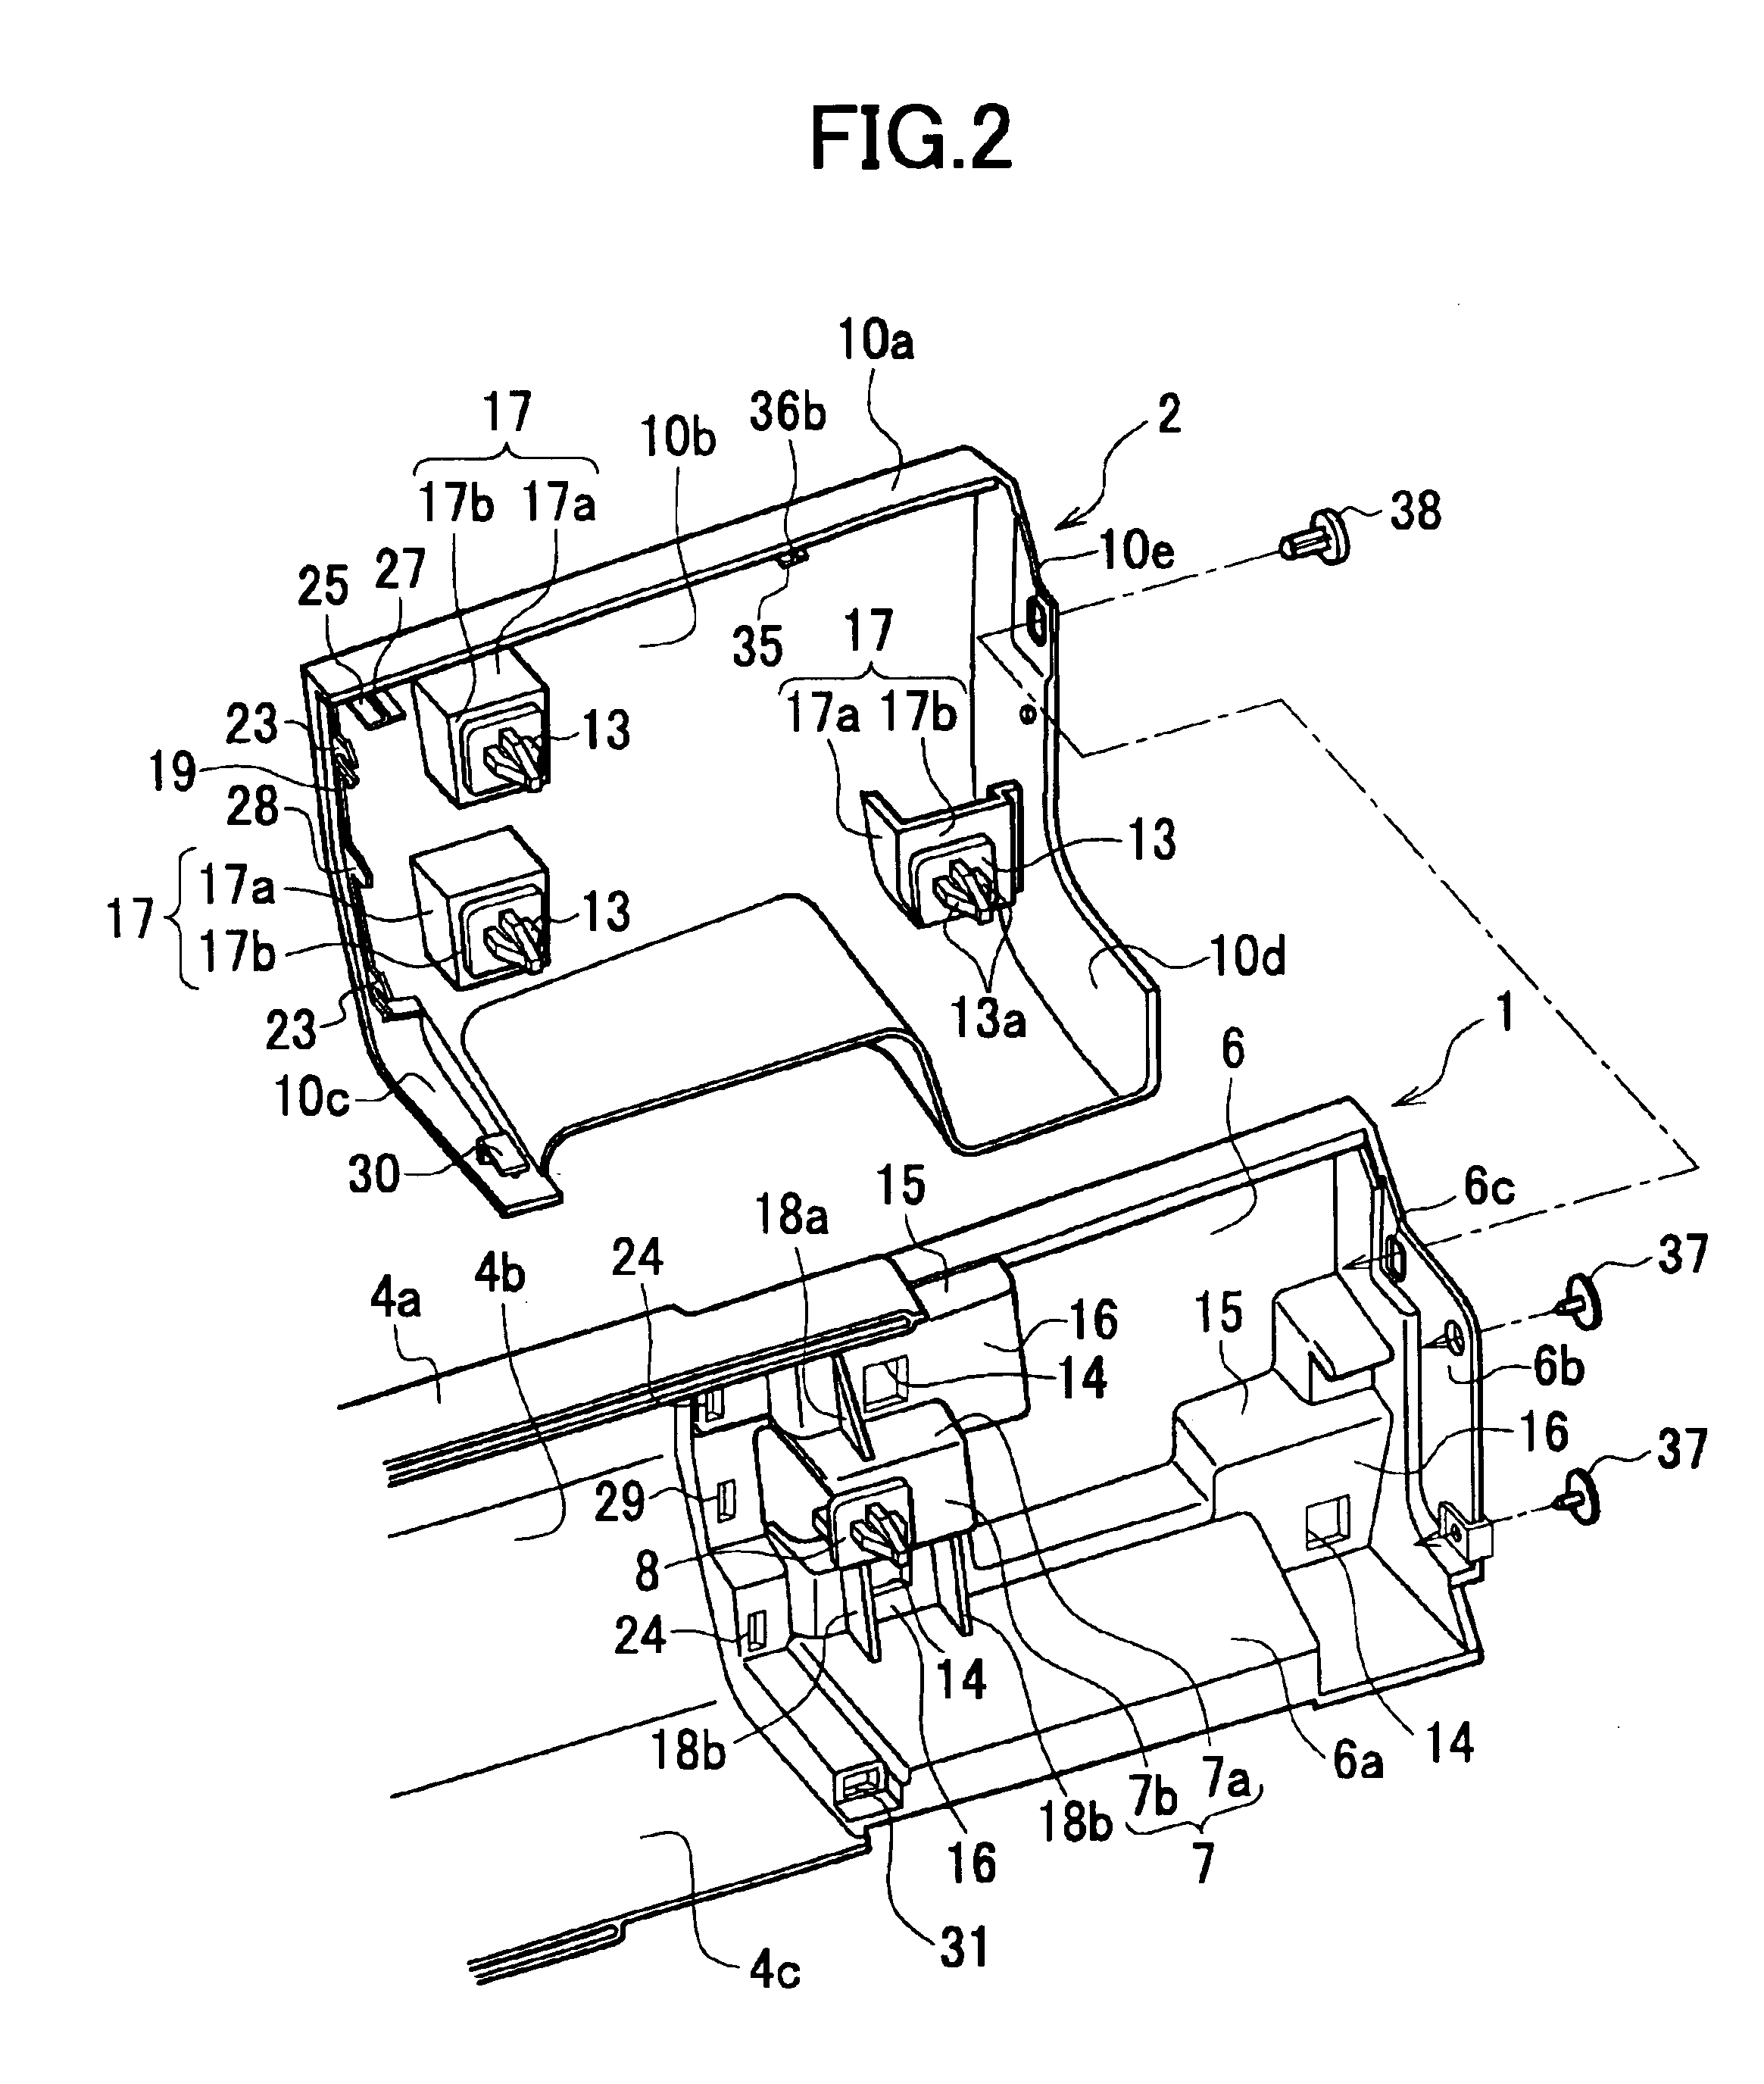 Divided structure of a long plastic component for a vehicle